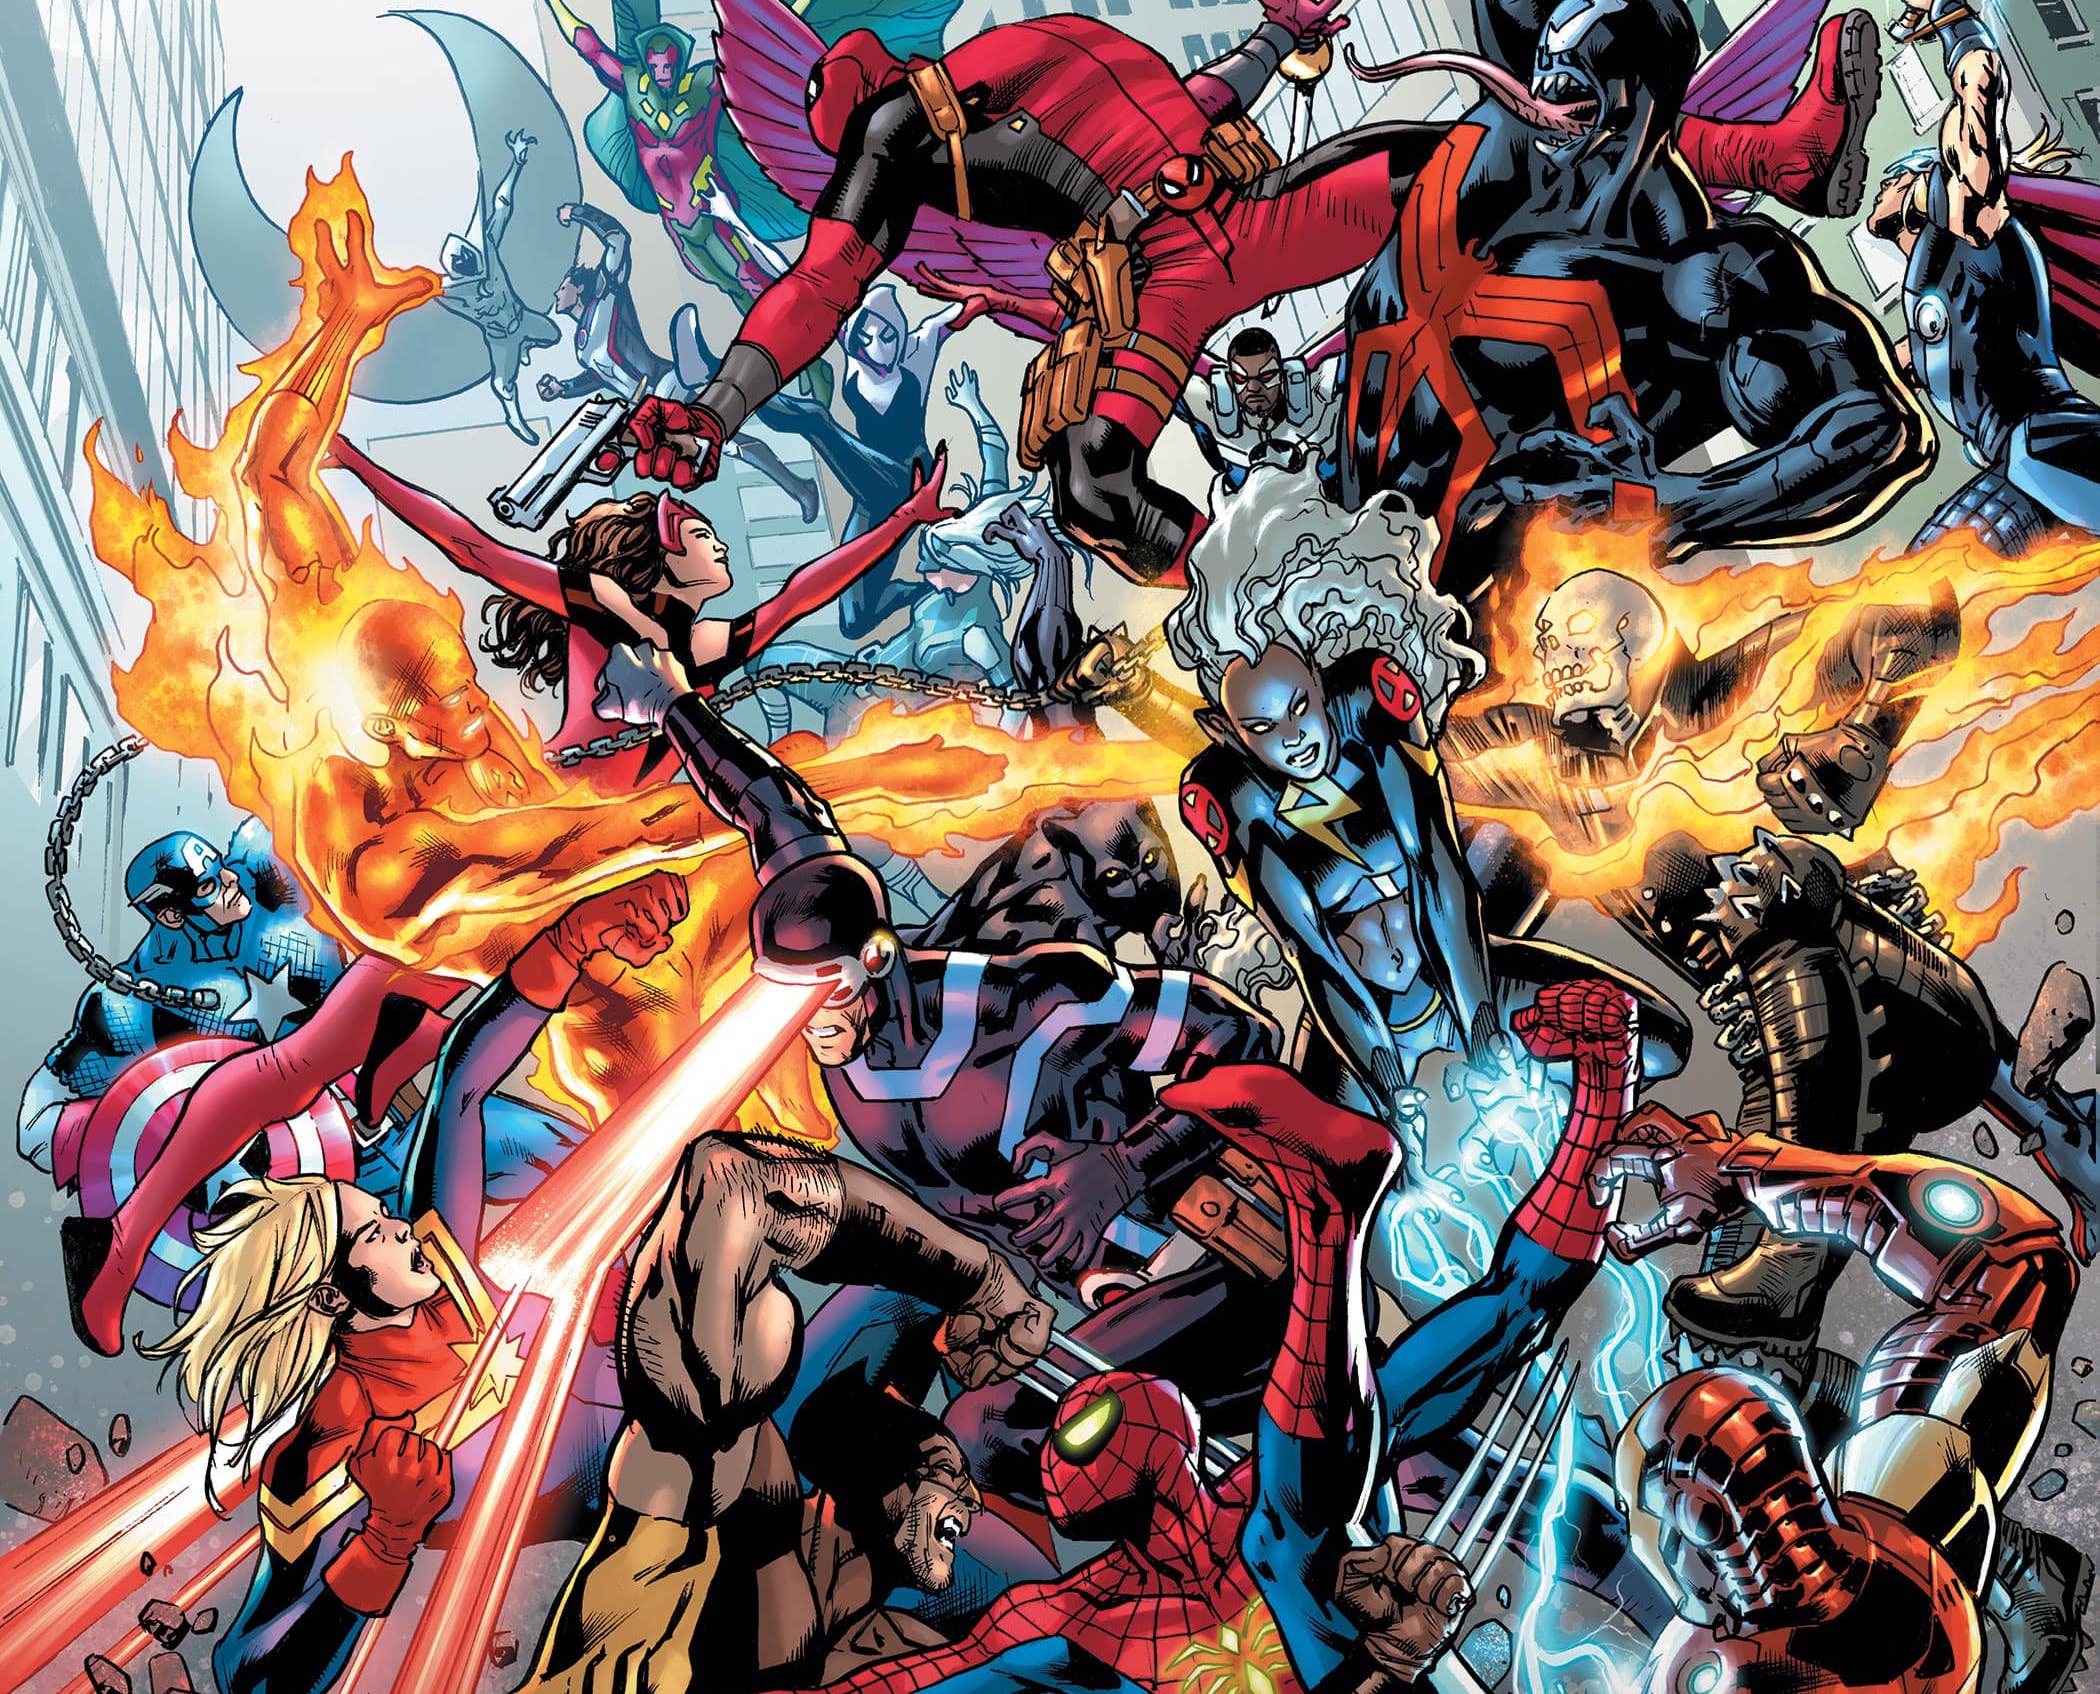 Marvel Comics teases 'Contest of Chaos' coming in 2023